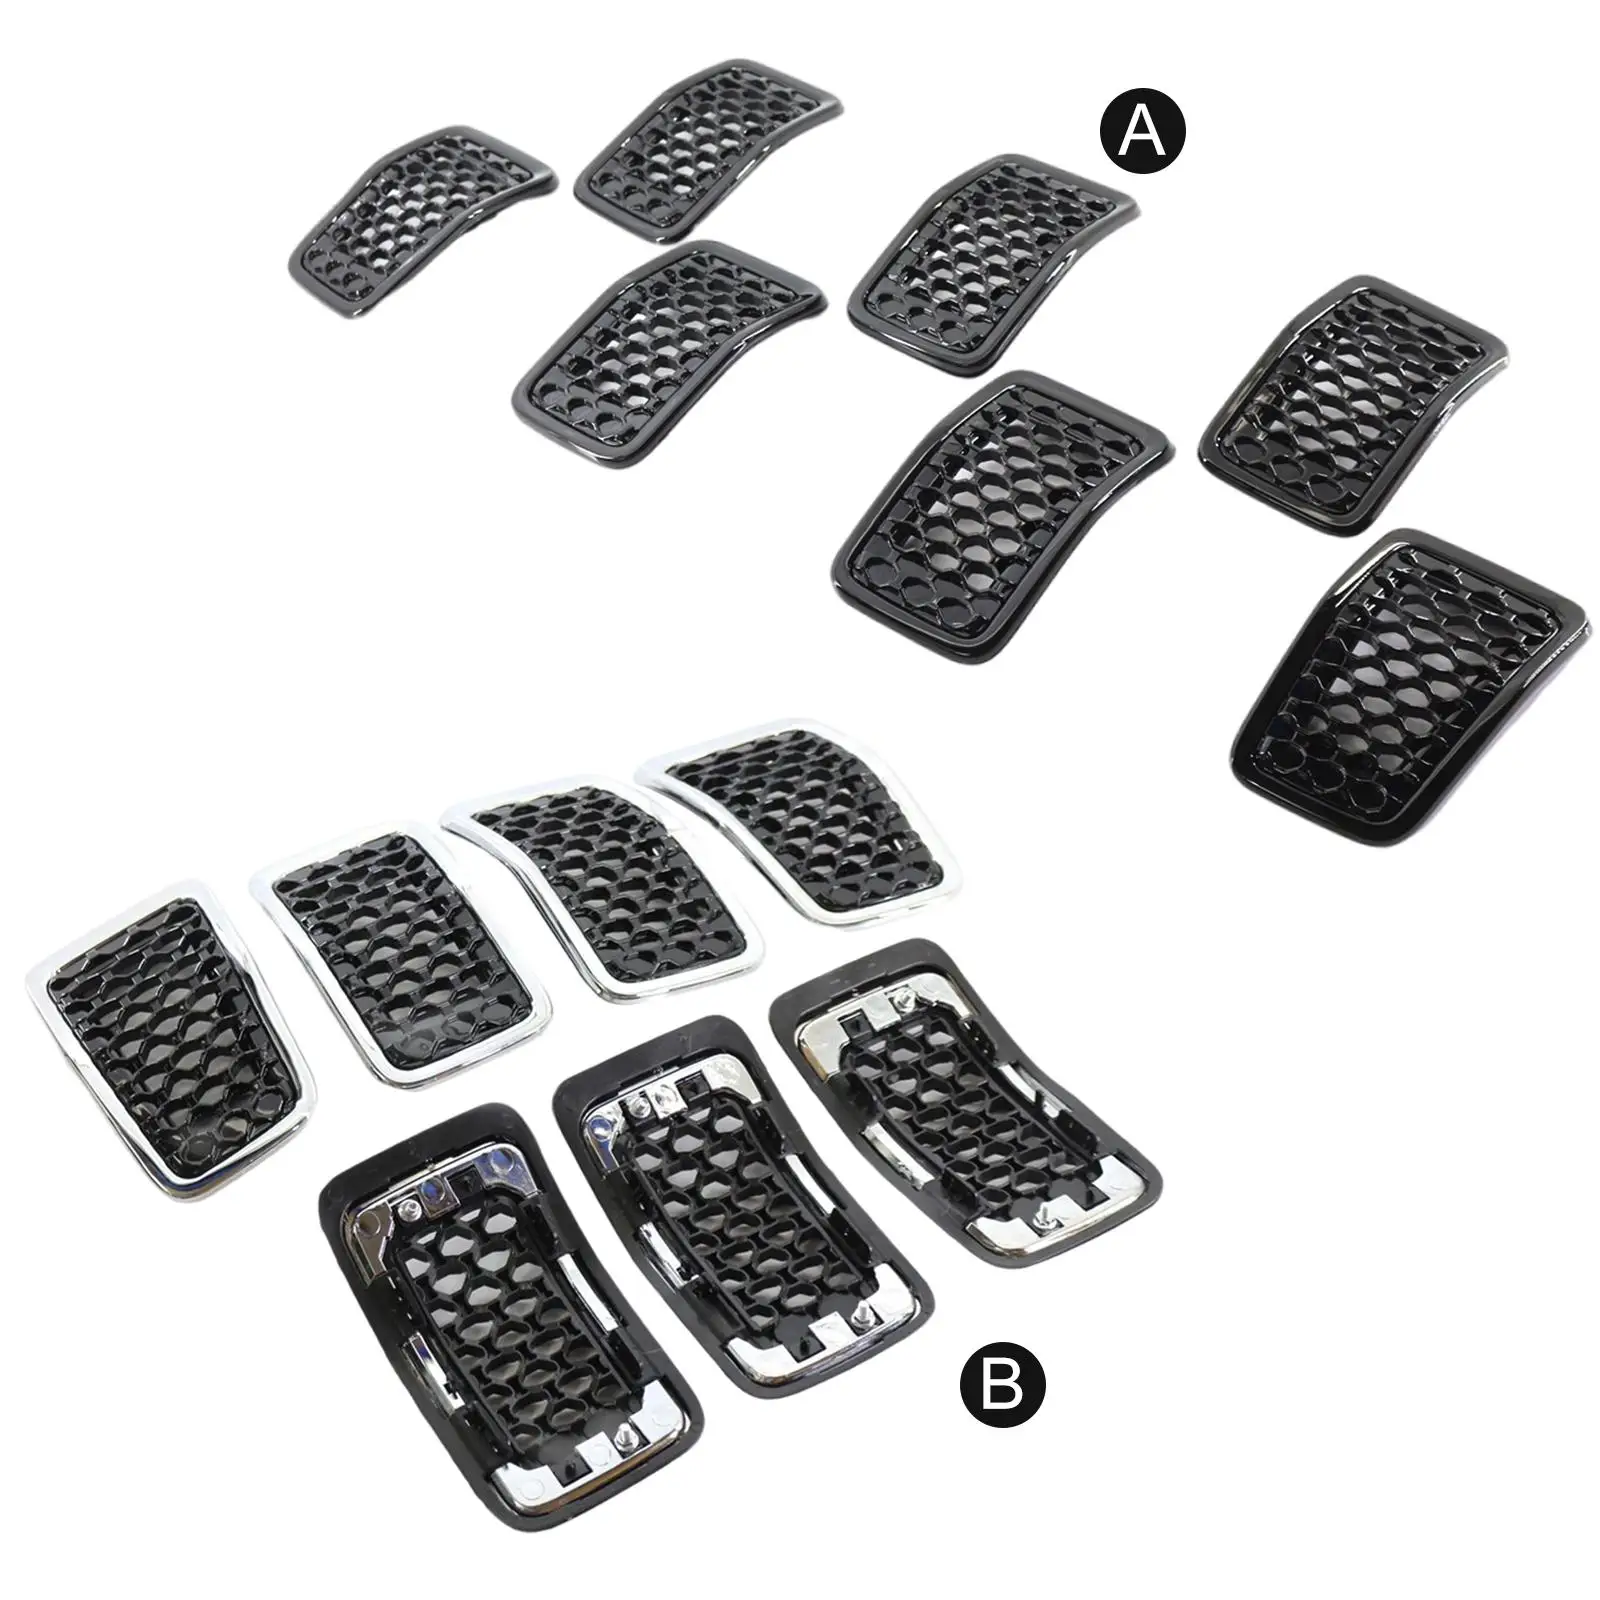 7 Mesh Grille Insert, Car Grille Covers for Cherokee 2019-22 ,Replacement  Decorative Accessories